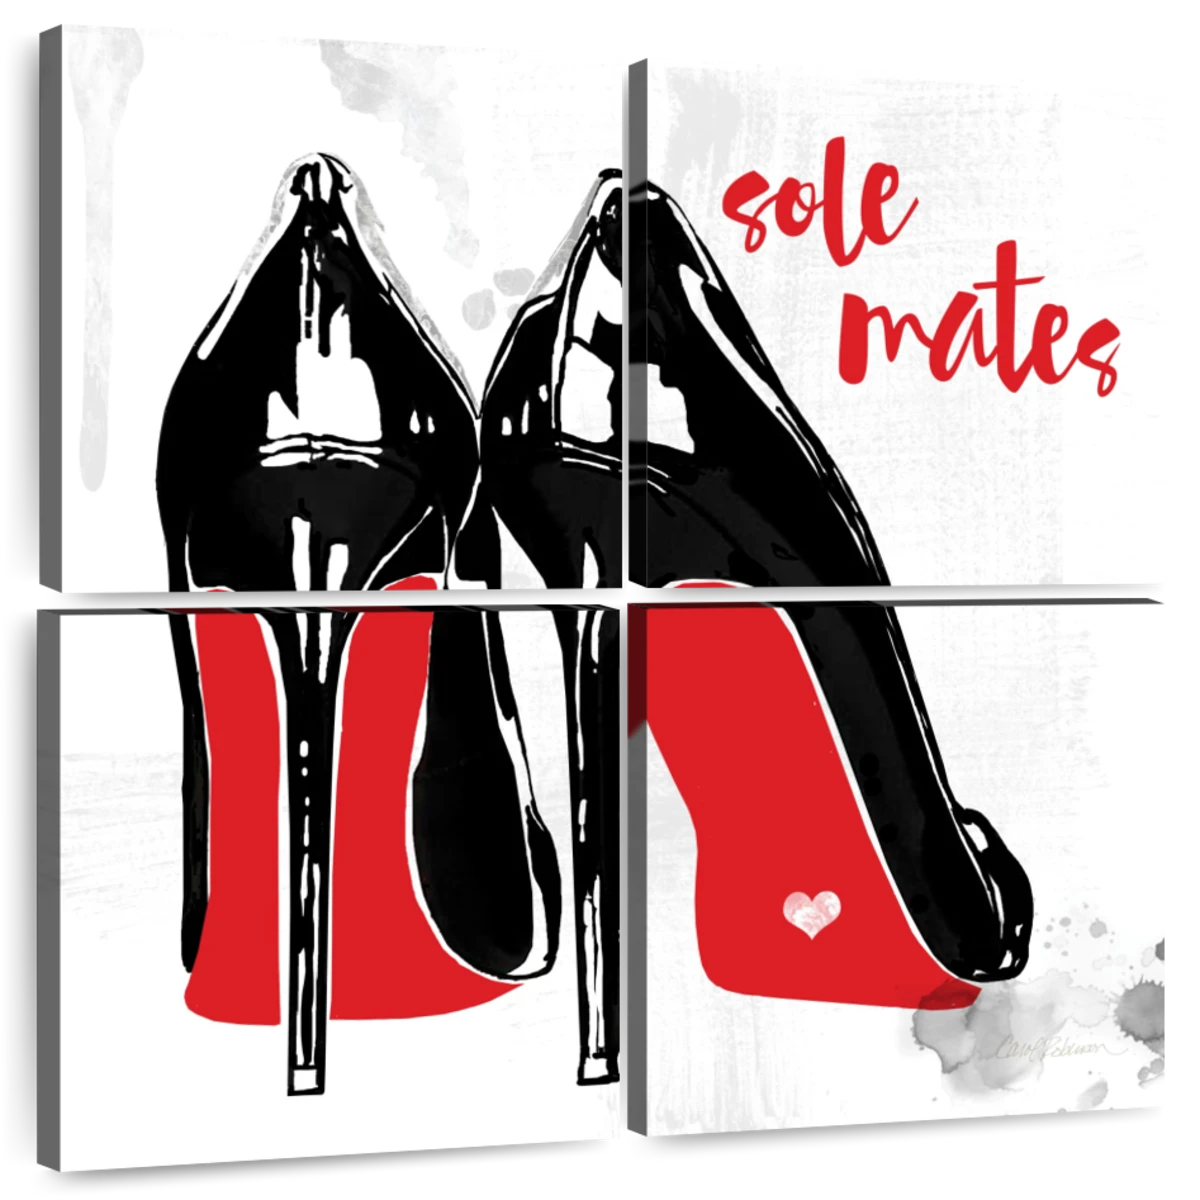 Shoe designer Louboutin wins legal battle to bare its red sole